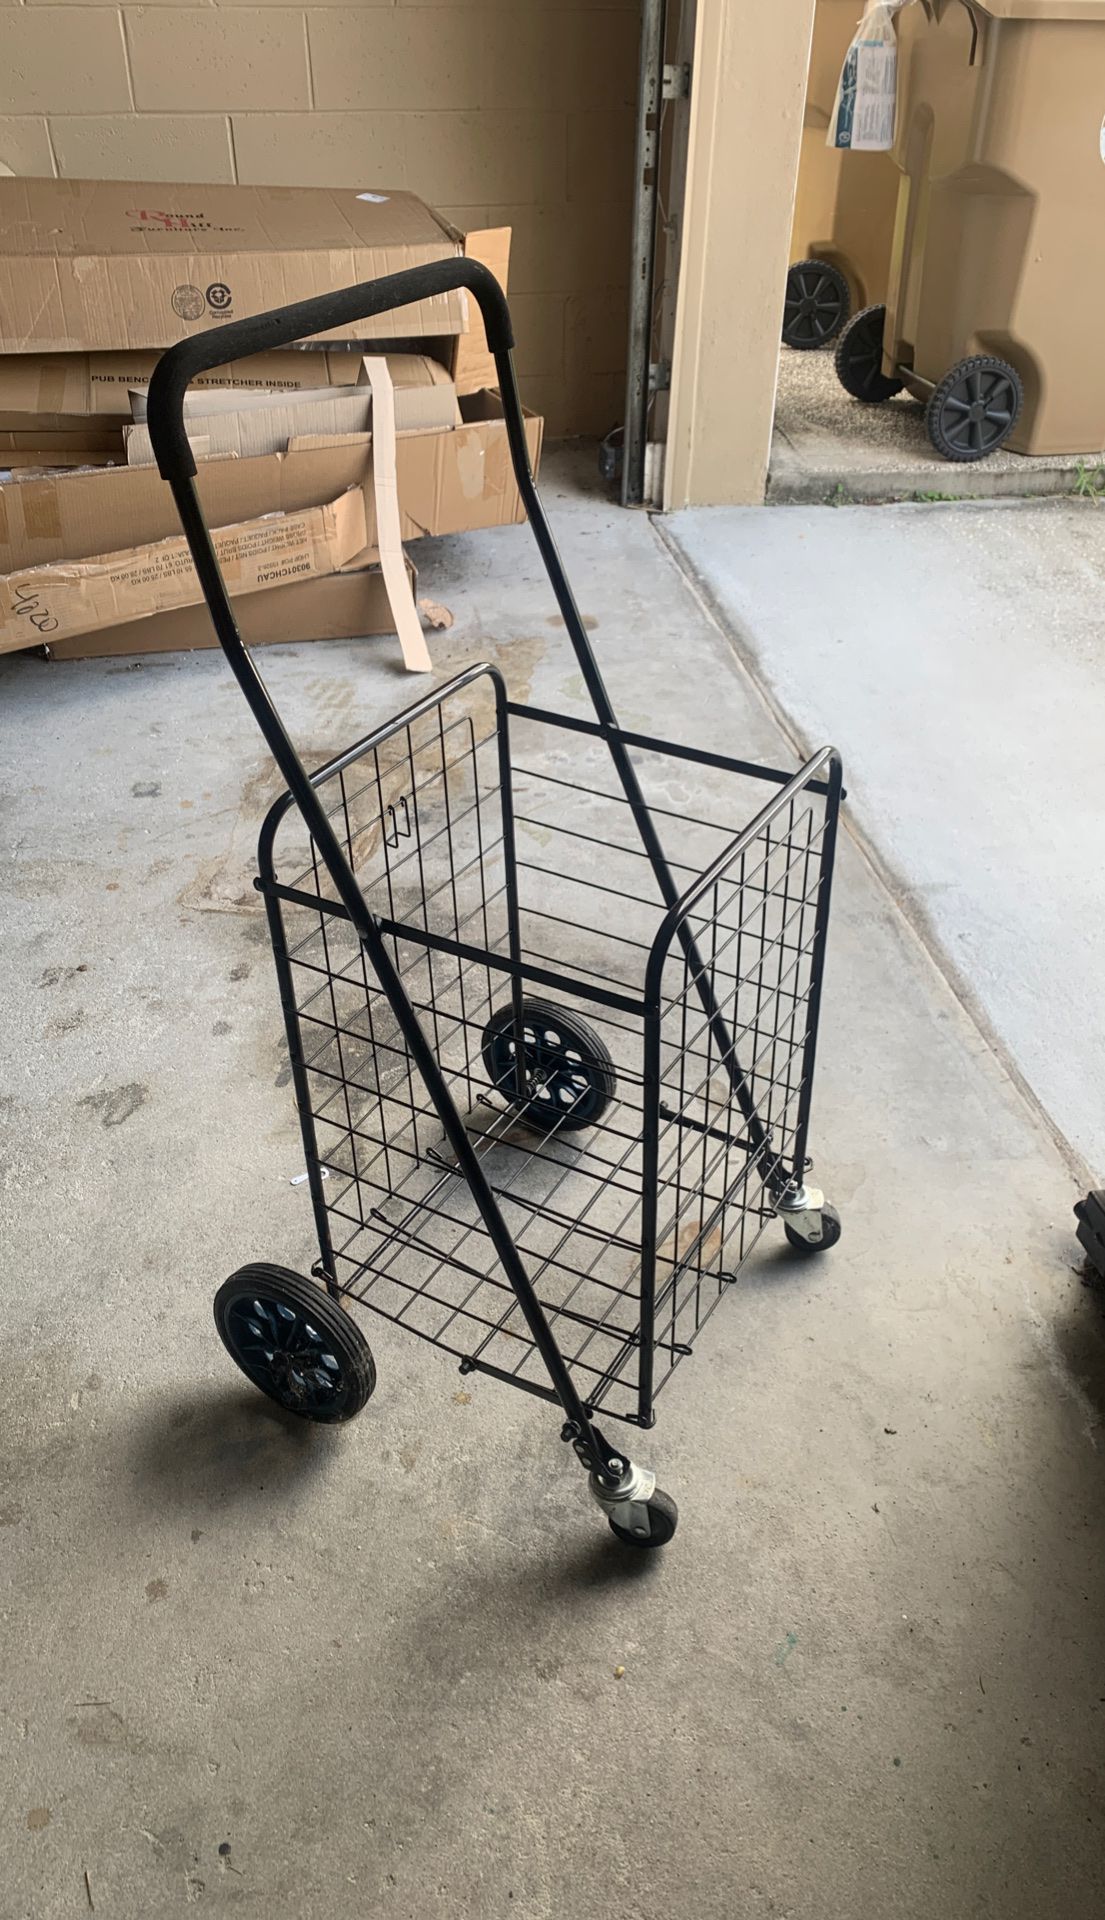 Grocery carrier dolly